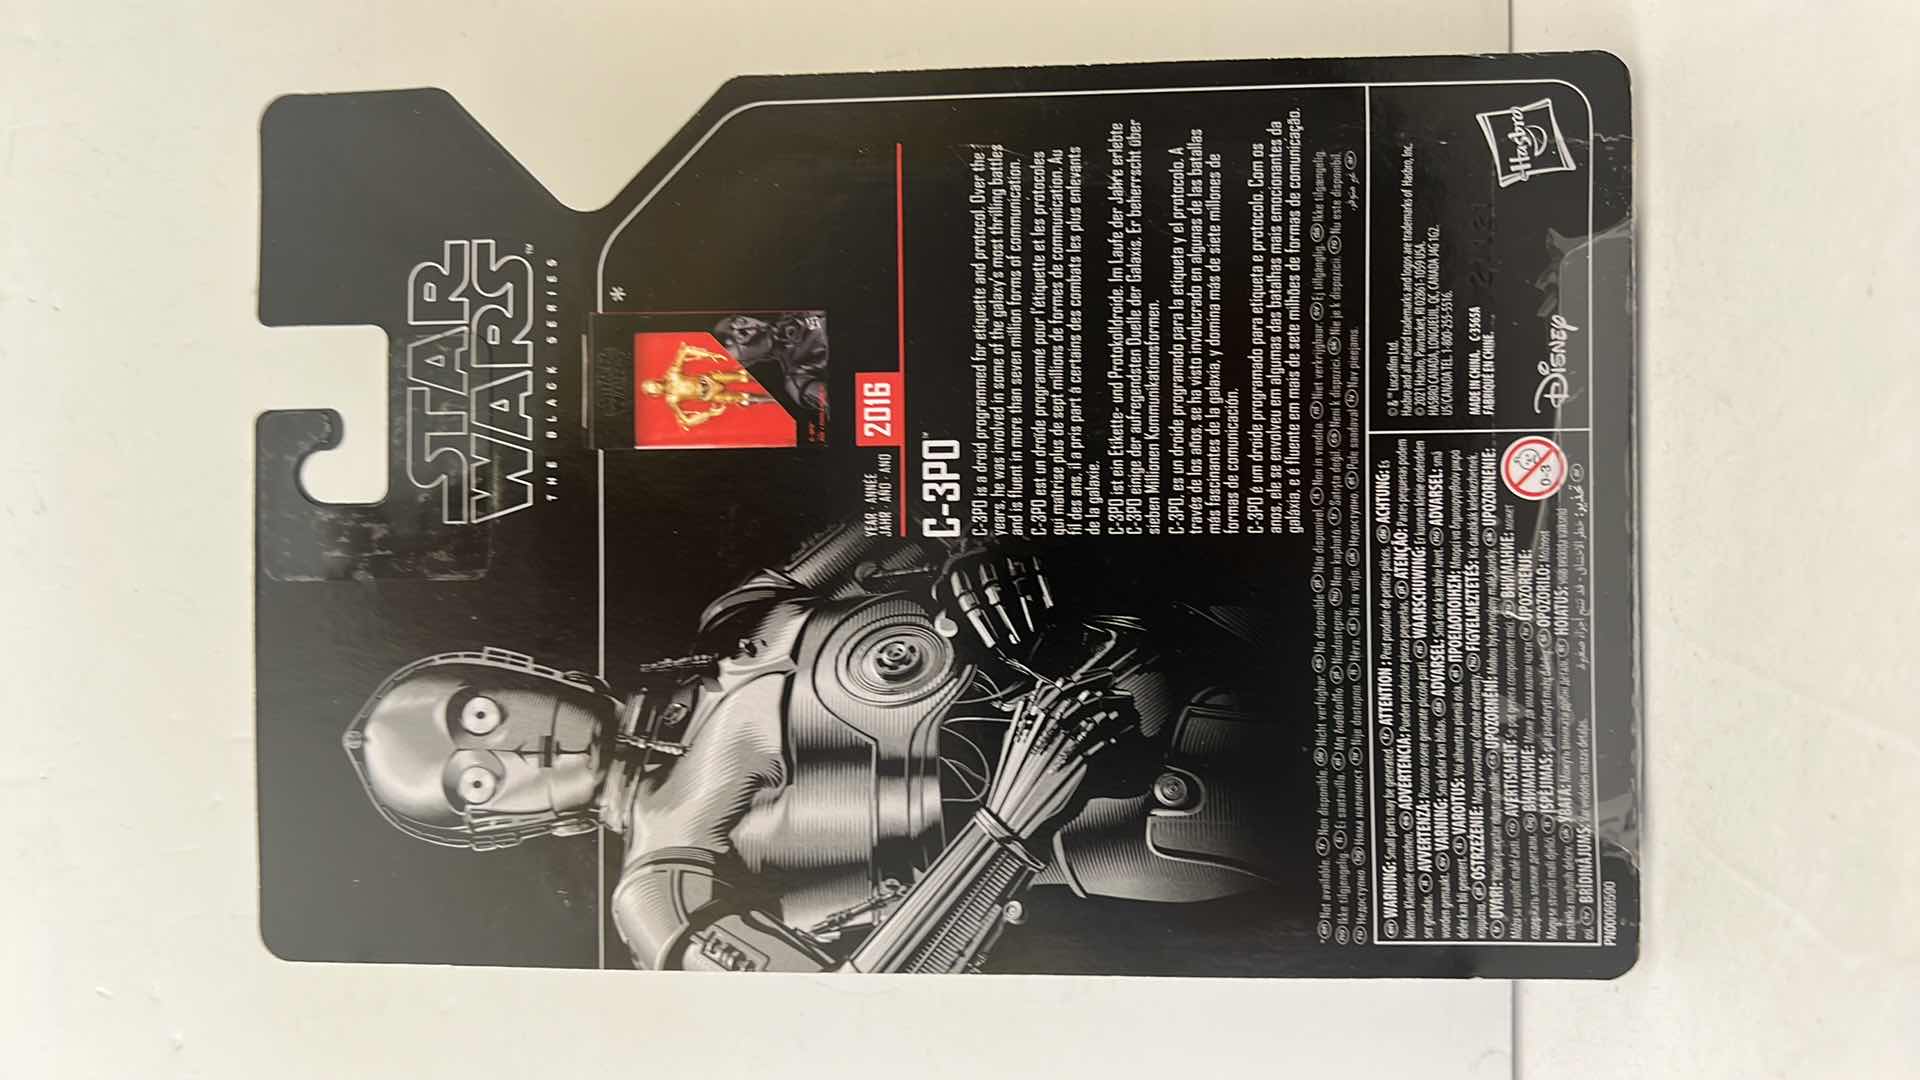 Photo 2 of BRAND NEW STAR WARS THE BLACK SERIES “C-3PO” ACTION FIGURE $29